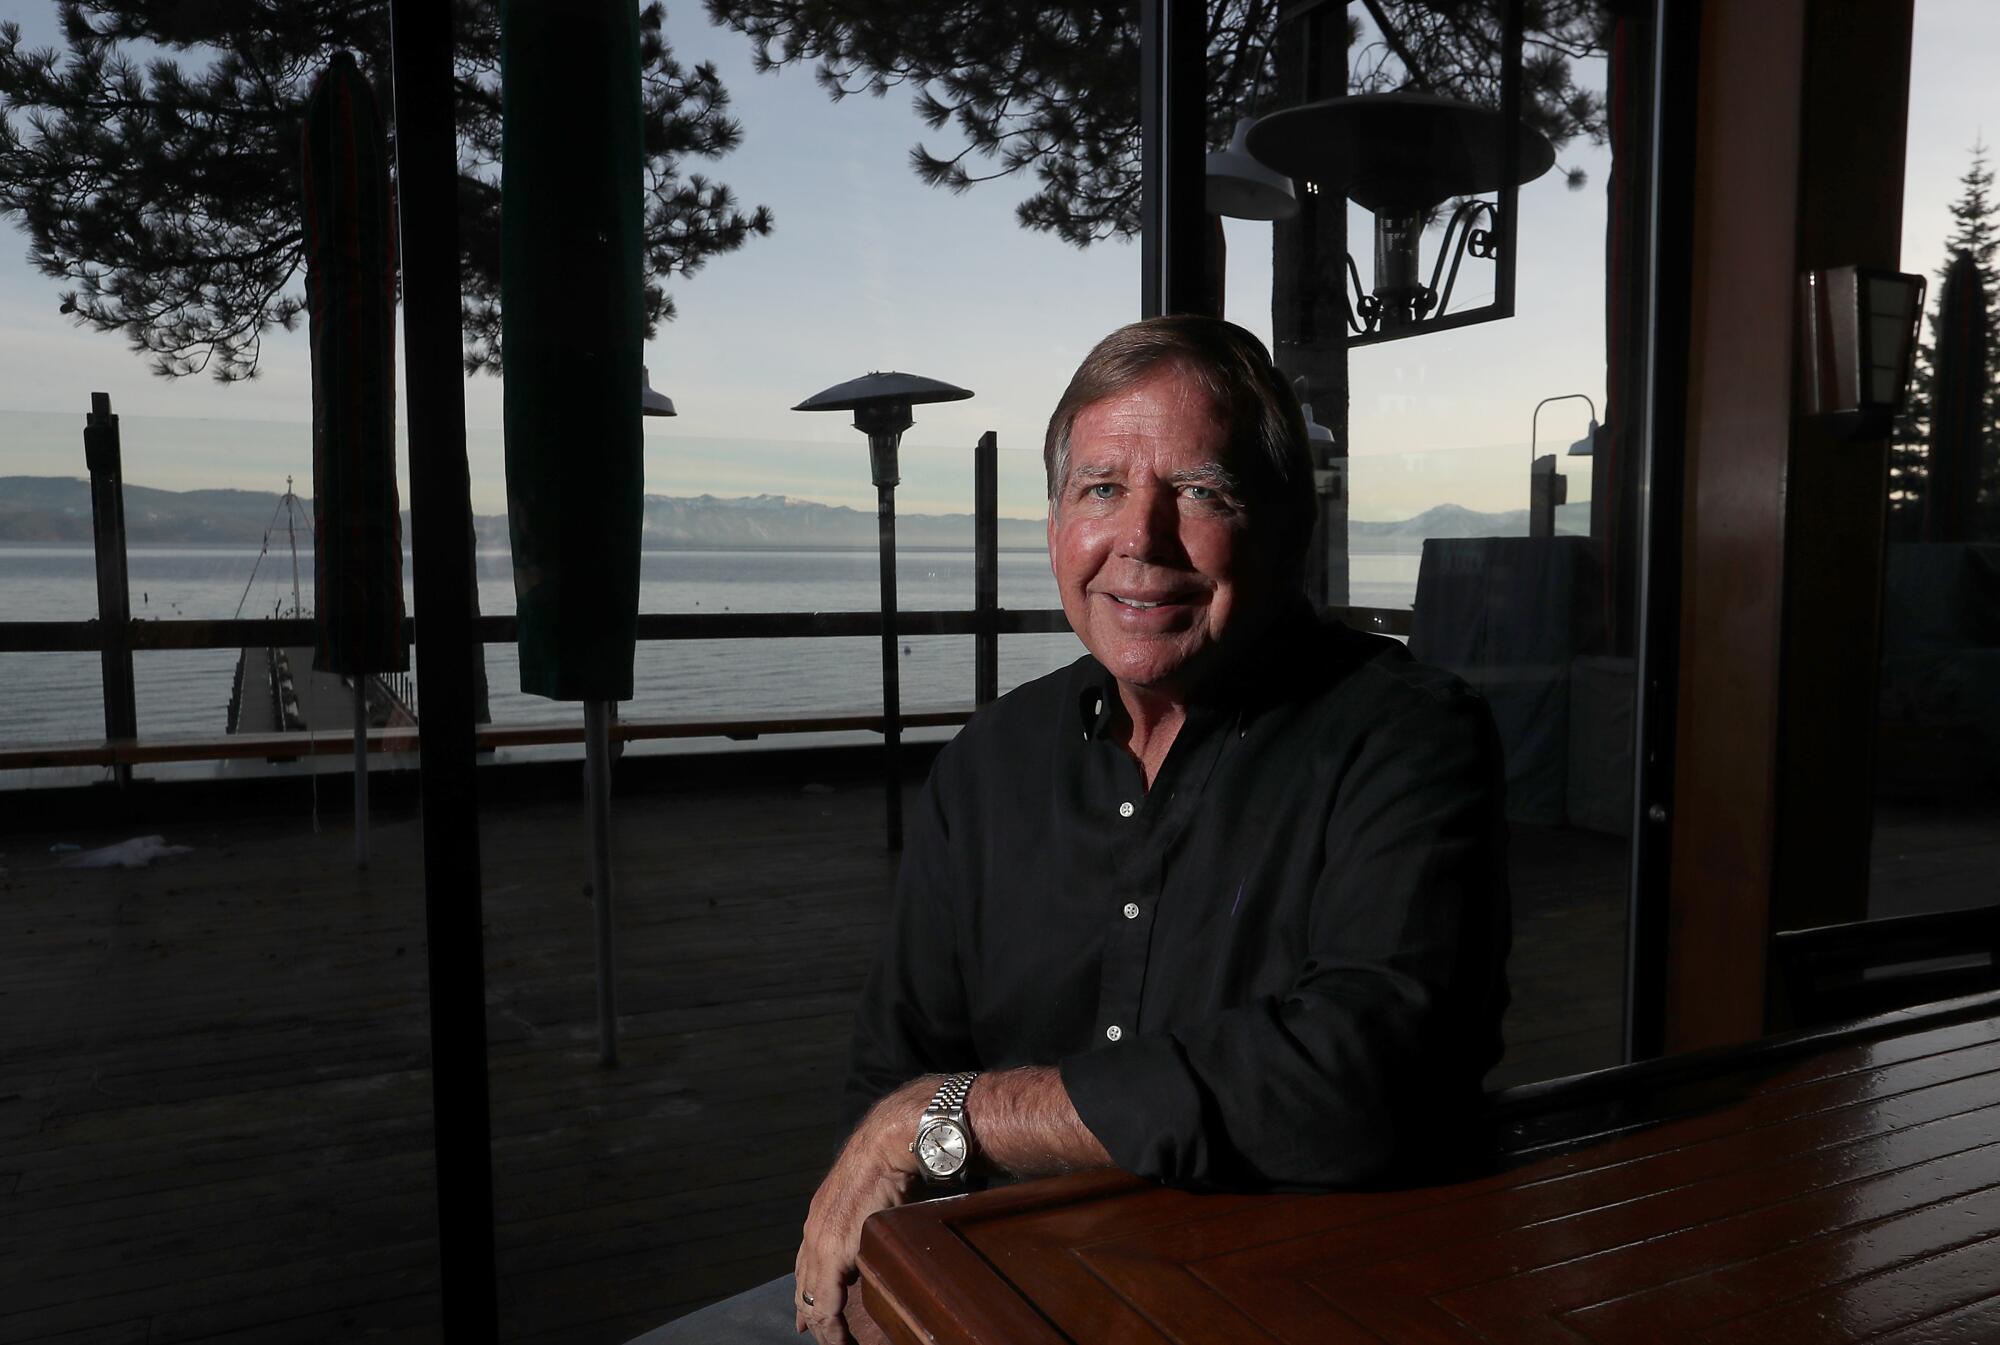 Tom Turner is the owner of restaurants in the Lake Tahoe area, including Gar Woods and the Riva Grill.